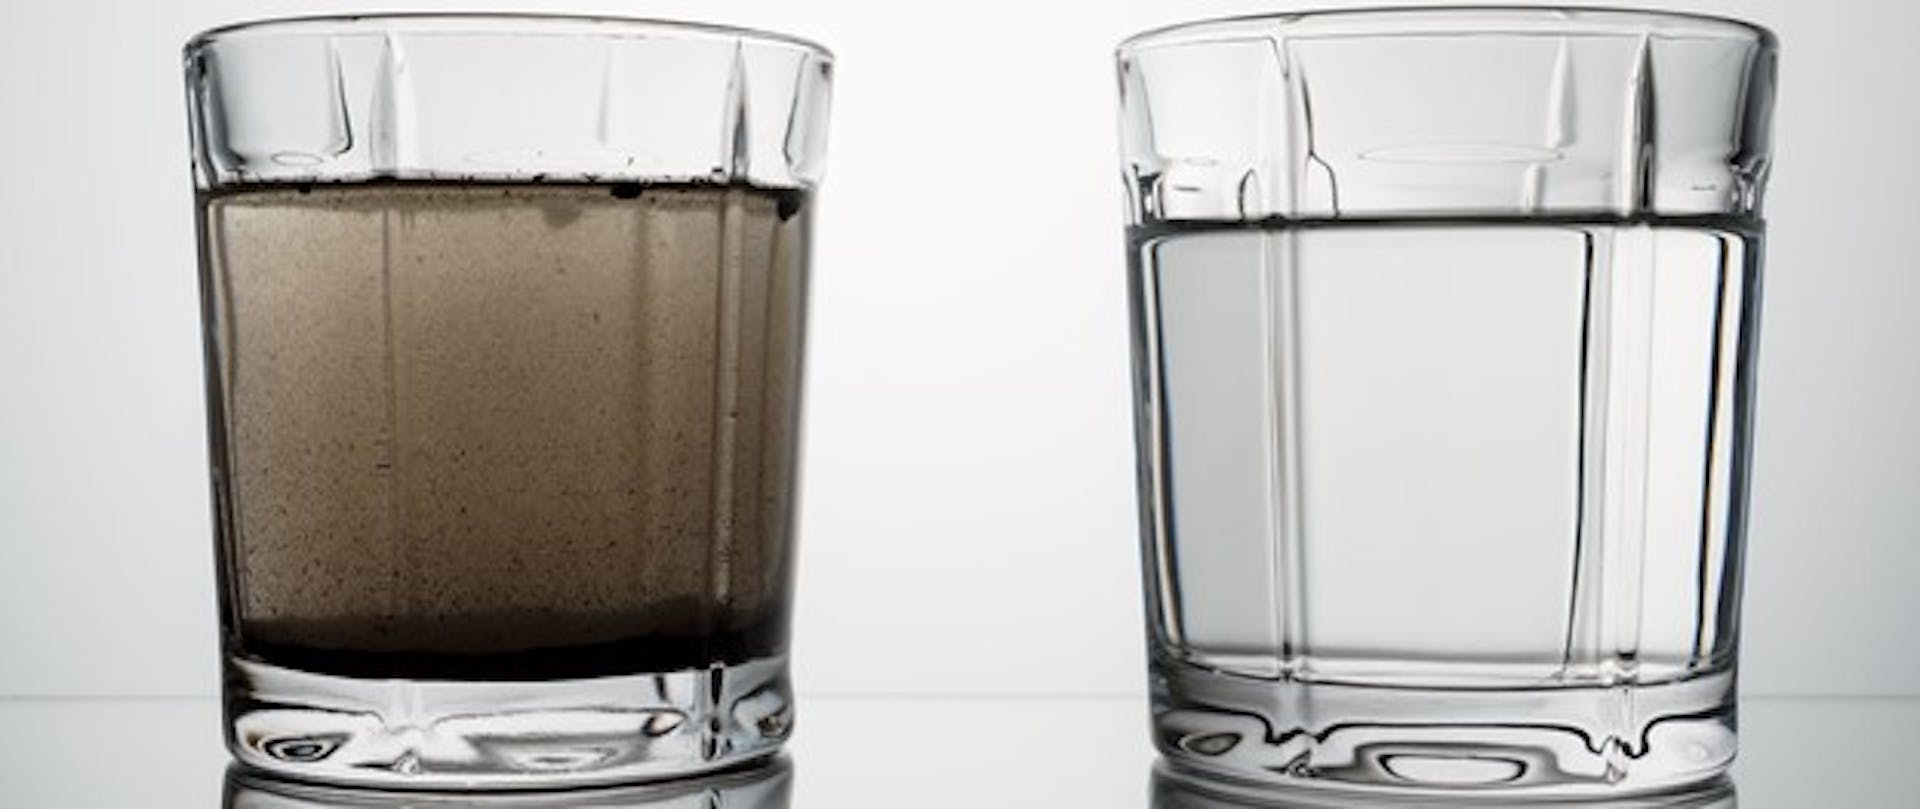 How Water Filters Work and Why You Need One